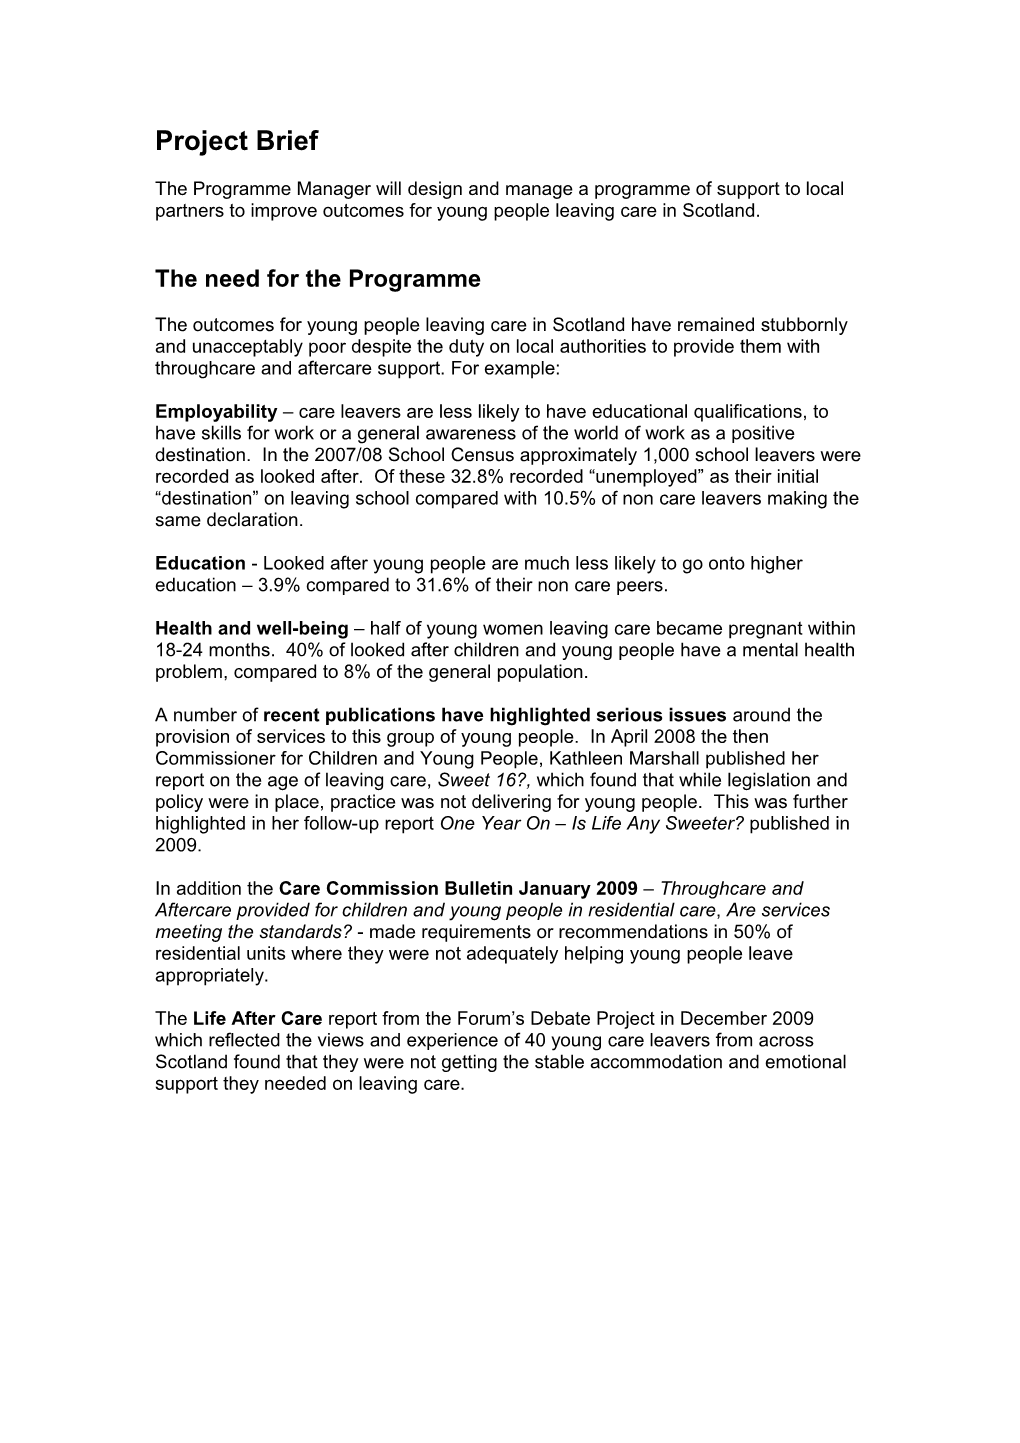 The Need for the Programme